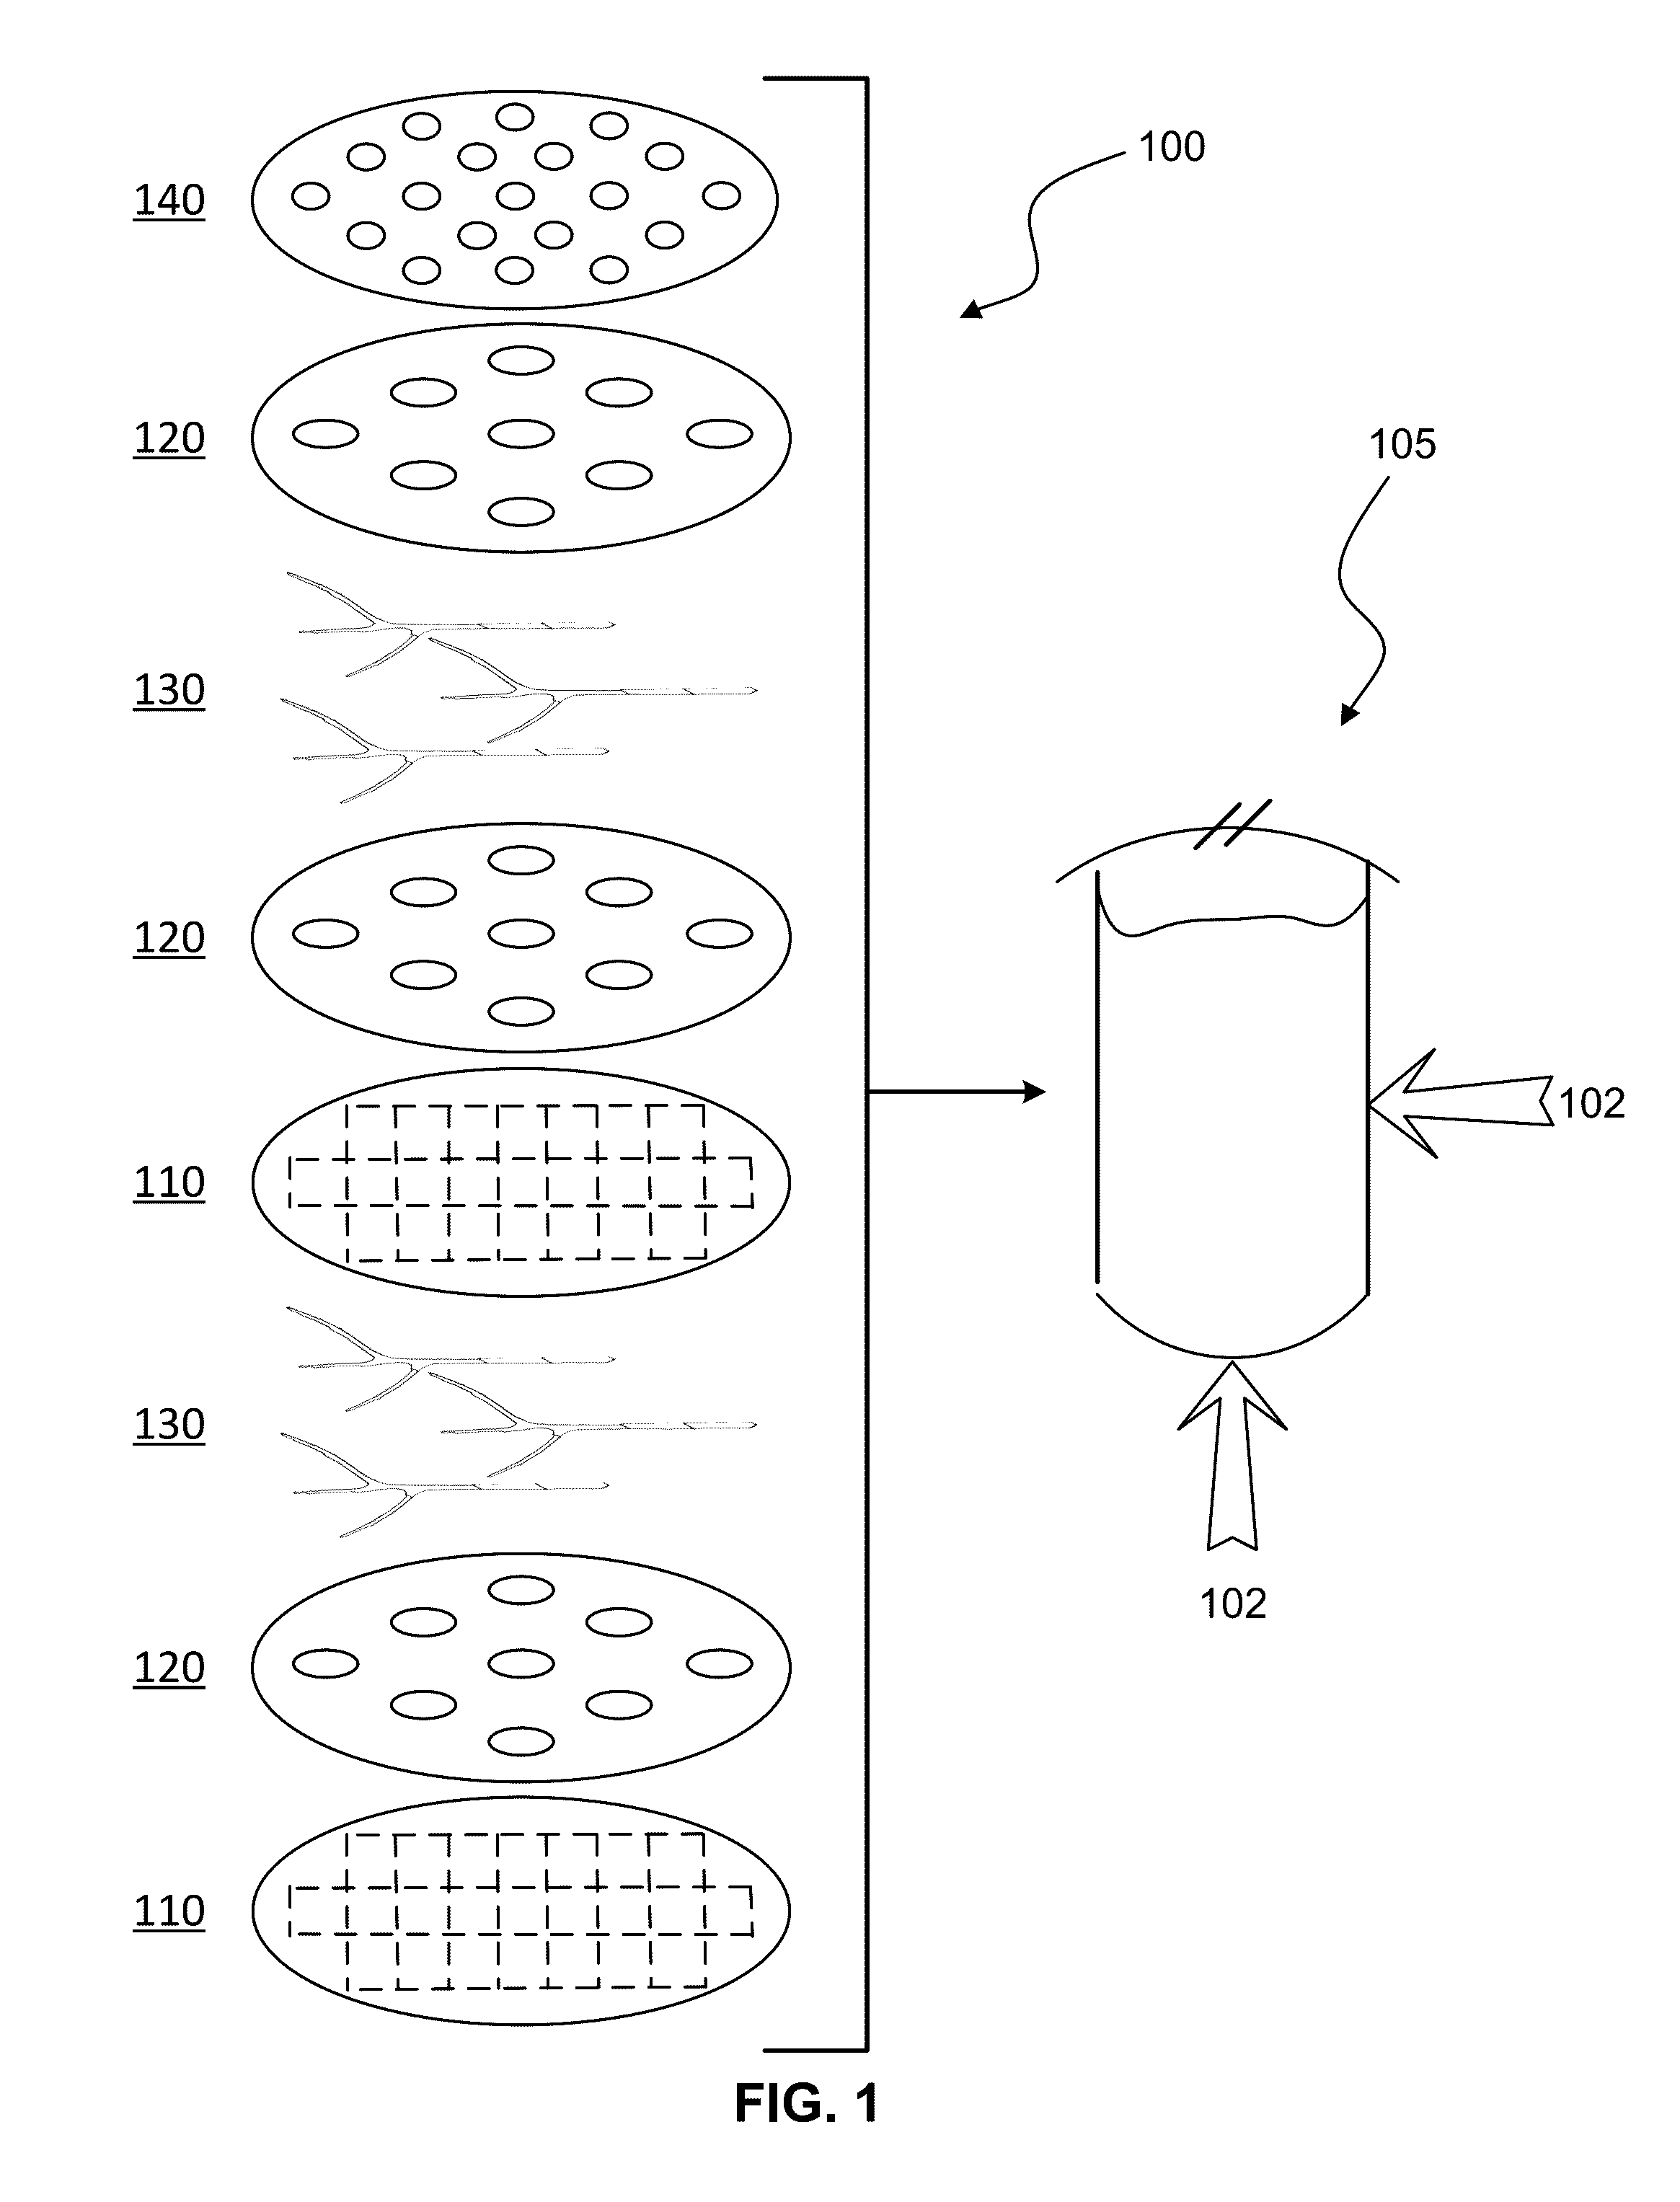 Decortication methods for producing raw materials from plant biomass